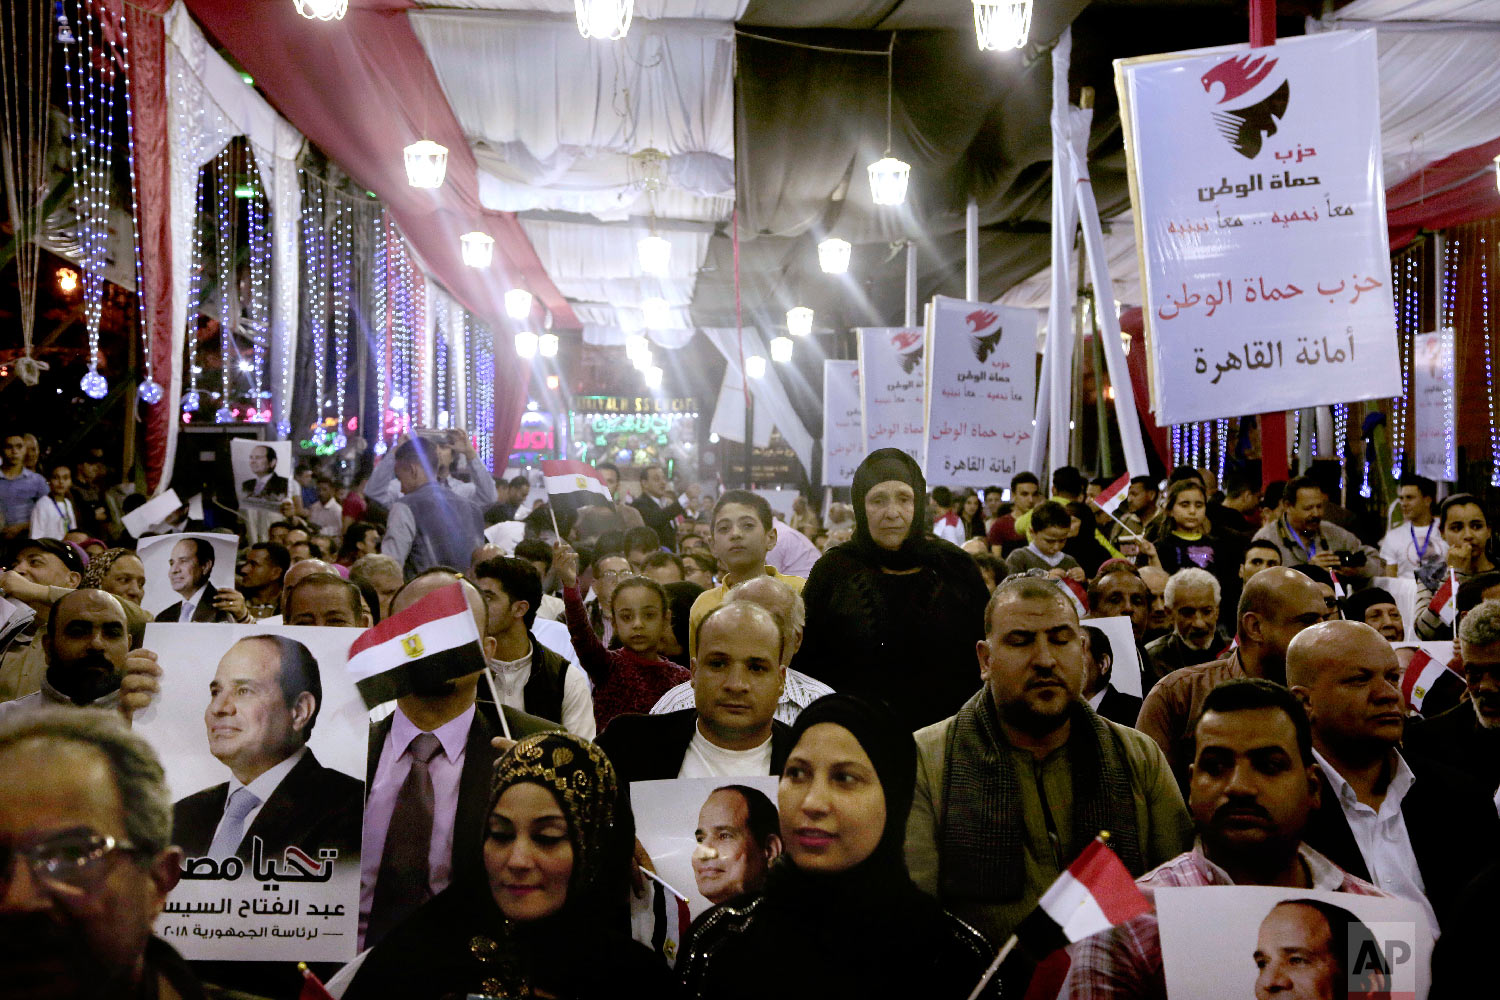  Supporters of Egyptian presidential candidate President Abdel-Fattah el-Sissi hold campaign posters during a campaign rally, near the Gamaleya district of Cairo, where el-Sissi was born, in front of al-Hussein Mosque, Egypt, Monday, March 19, 2018. 